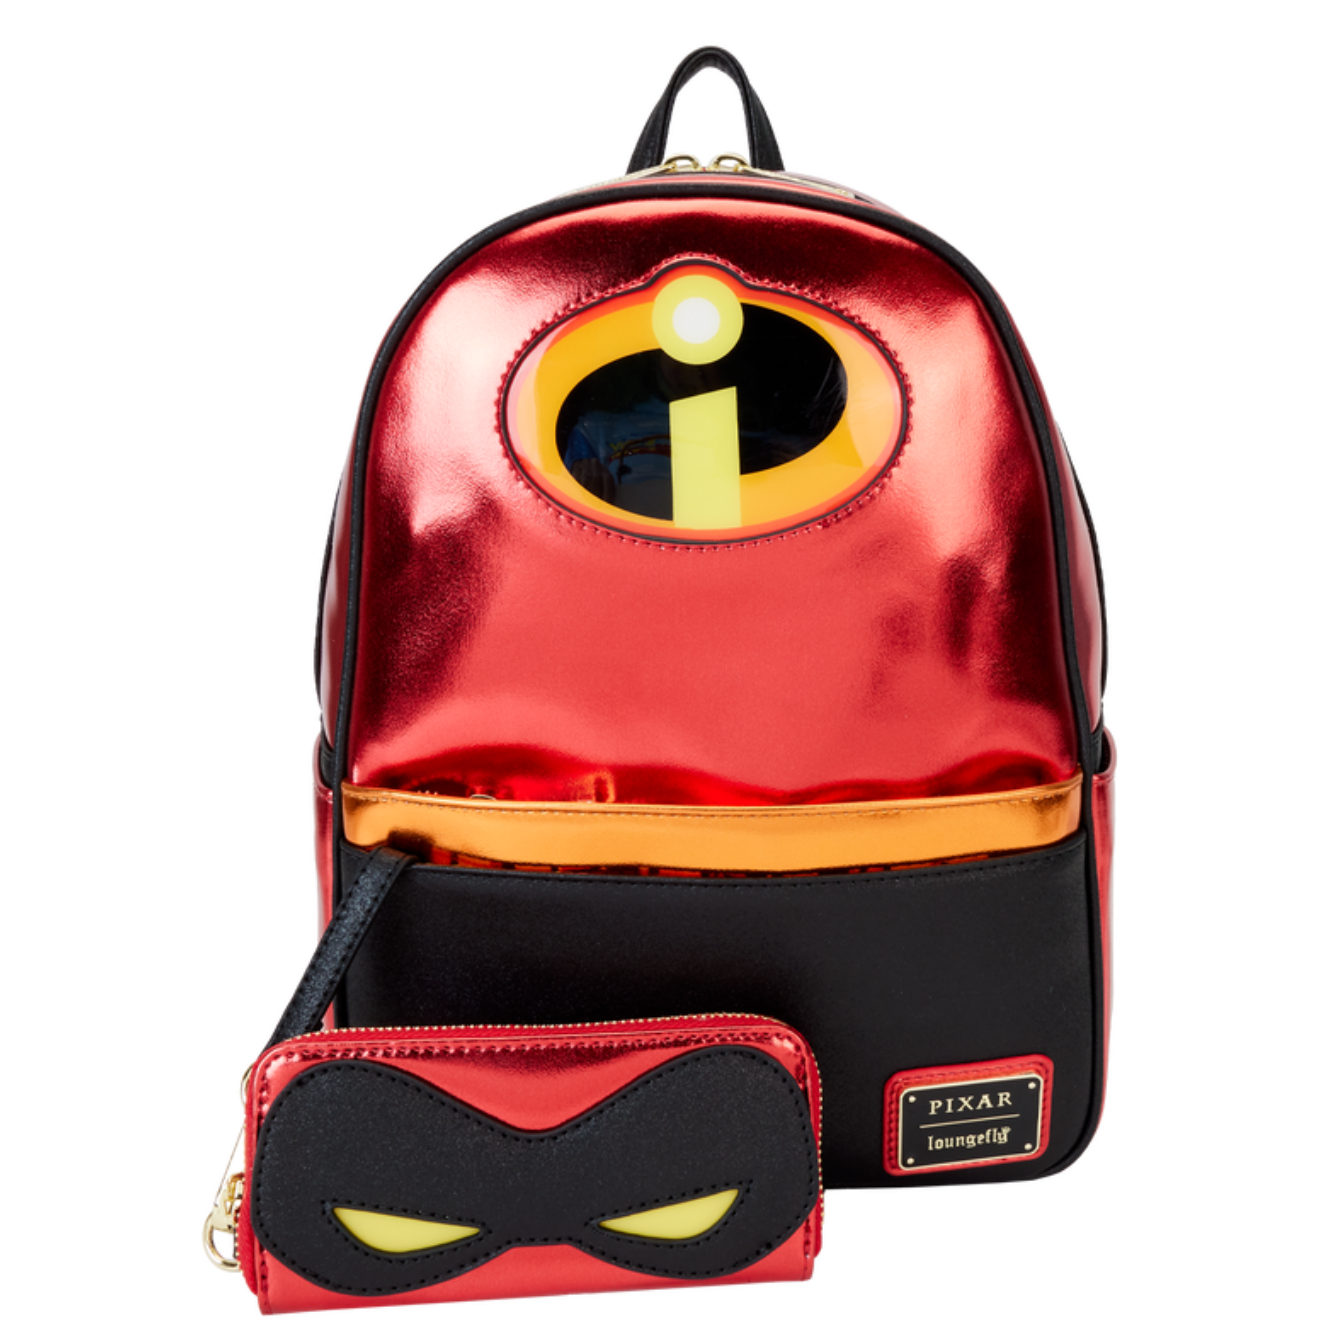 PRE-ORDER The Incredibles 20th Anniversary Light Up Metallic Cosplay Mini Backpack with Coin Bag